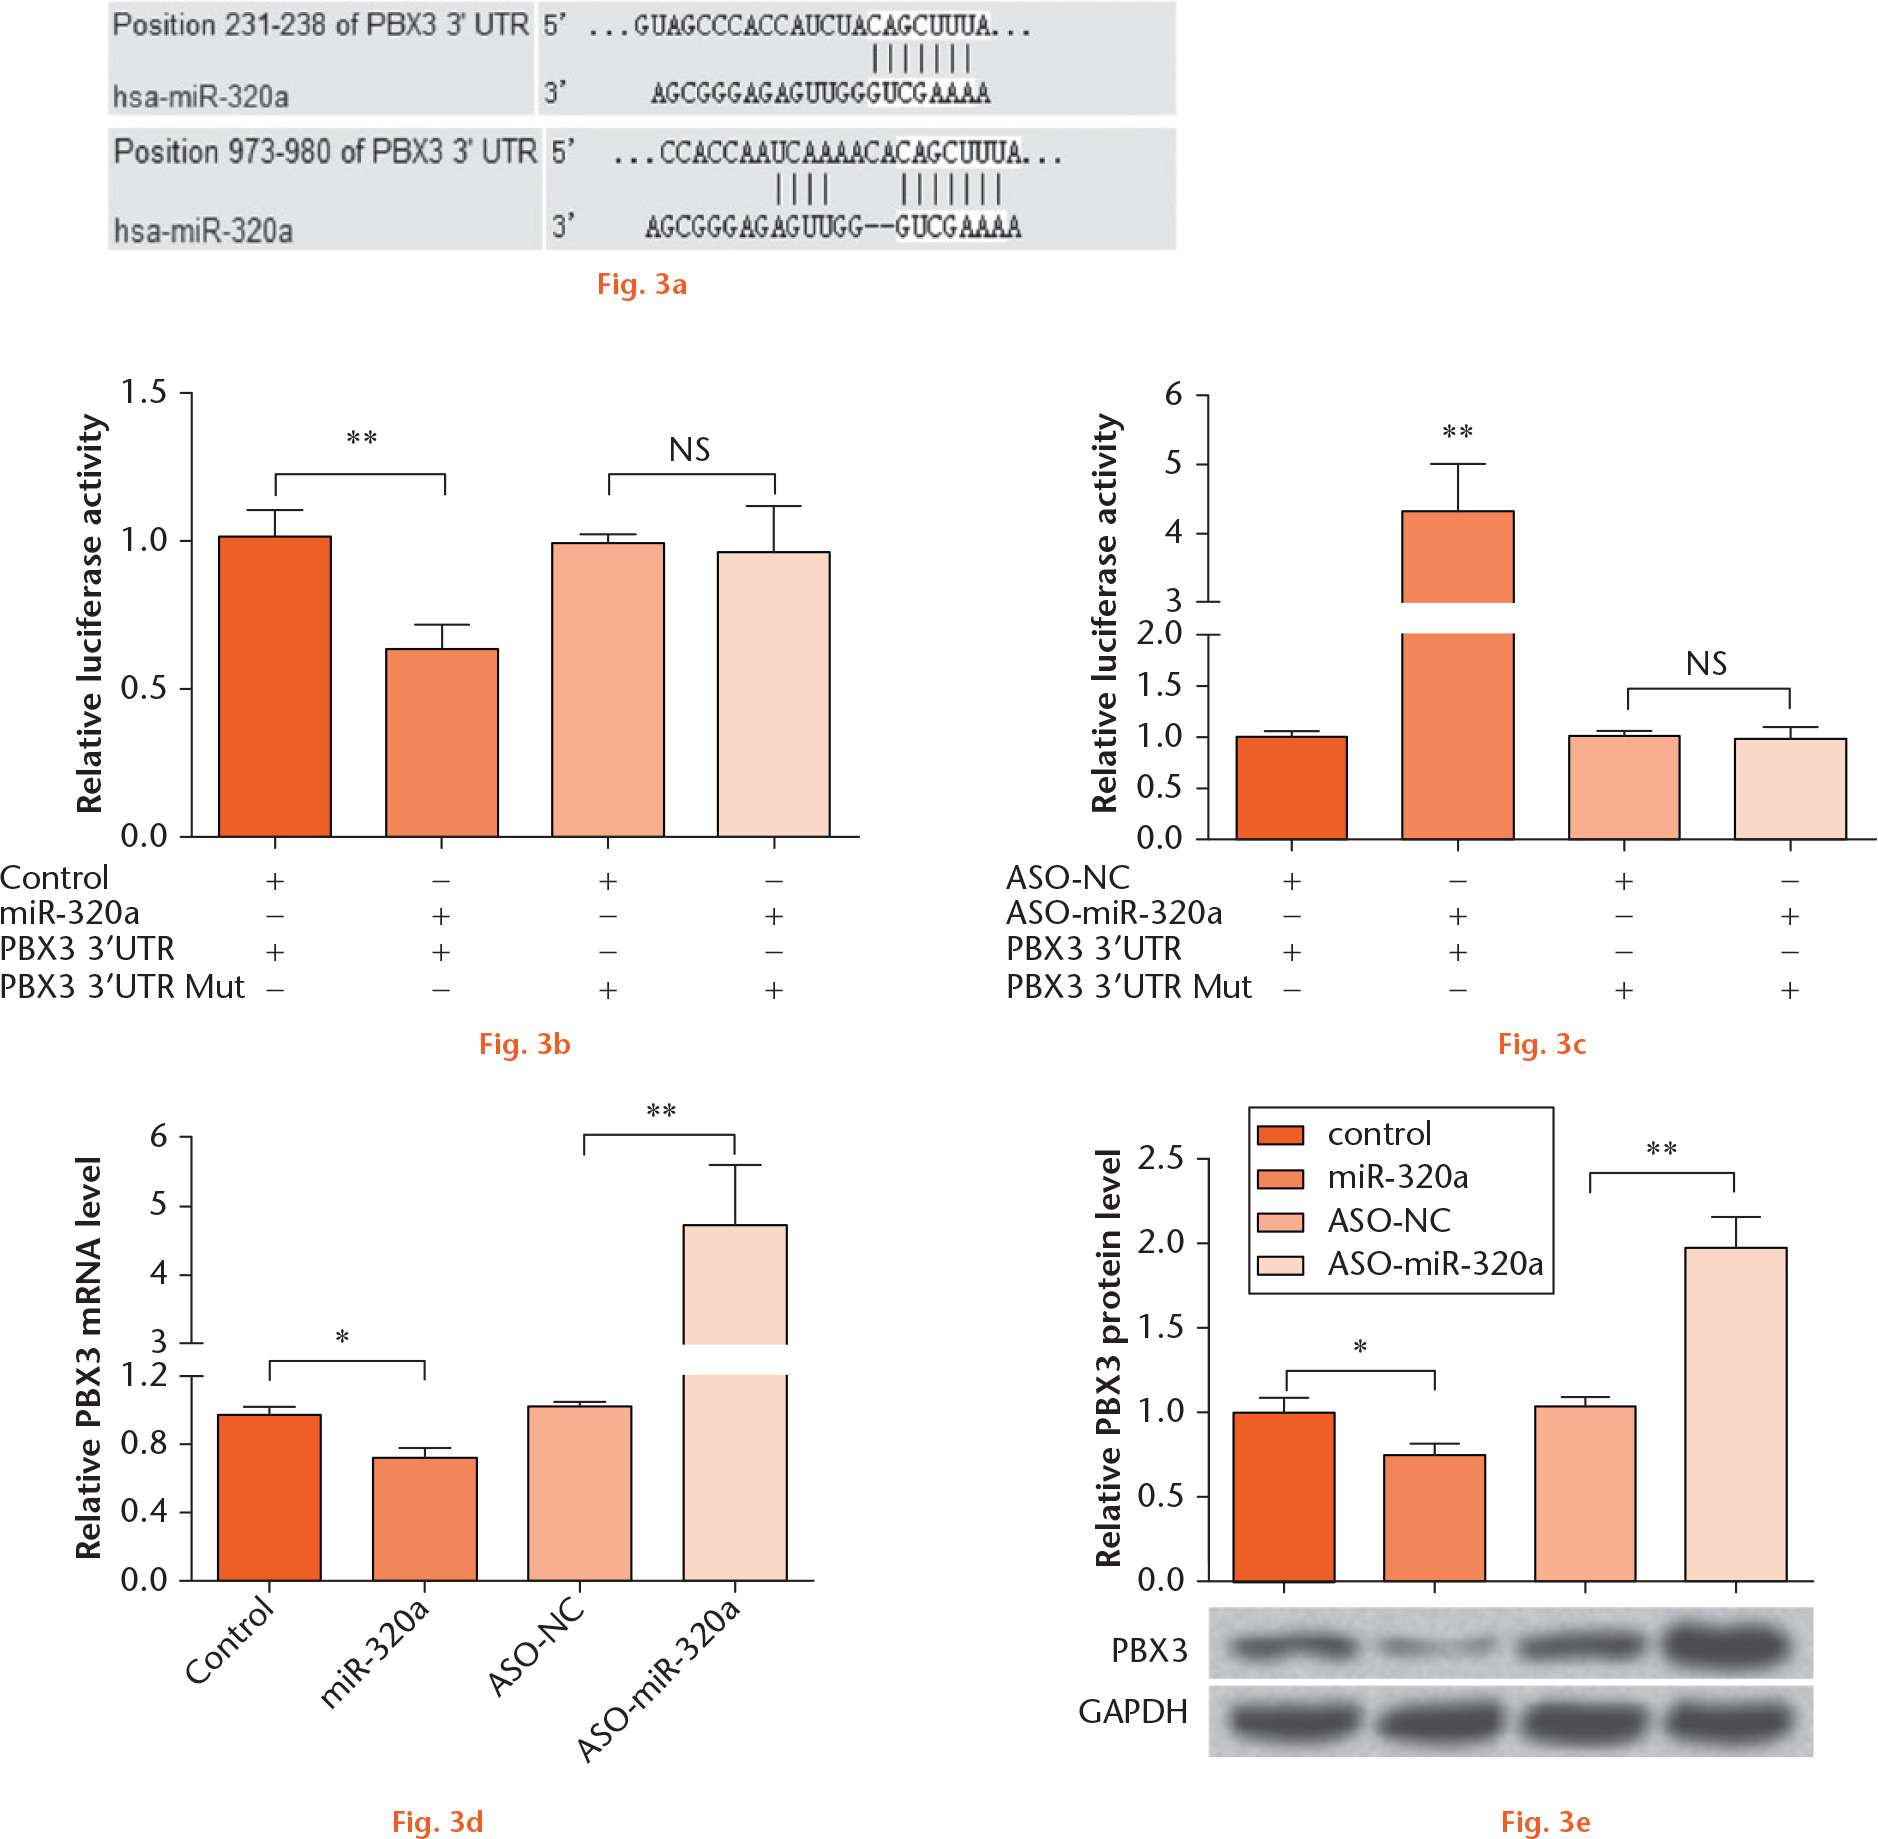  
            PBX3 was a directed target of miR-320a. (a) microRNA.org database was used to predict the target genes of miR-320a. (b) miR-320a or (c) ASO-miR-320a was co-transfected with the pMIR-Report vector containing full length PBX3 3’-UTR or a mutated seed site within pMIR-PBX3 into C28/I2 cells. Subsequently, a dual-luciferase reporter assay was performed. miR-320a or ASO-miR-320a was transfected into C28/I2 cells, and the (d) mRNA and (e) protein level expression of PBX3 were detected by RT-PCR and Western blot analysis, respectively. NS, no significance; *, p < 0.05; **, p < 0.01. Statistical analysis was performed using two-tailed paired t-test.
          